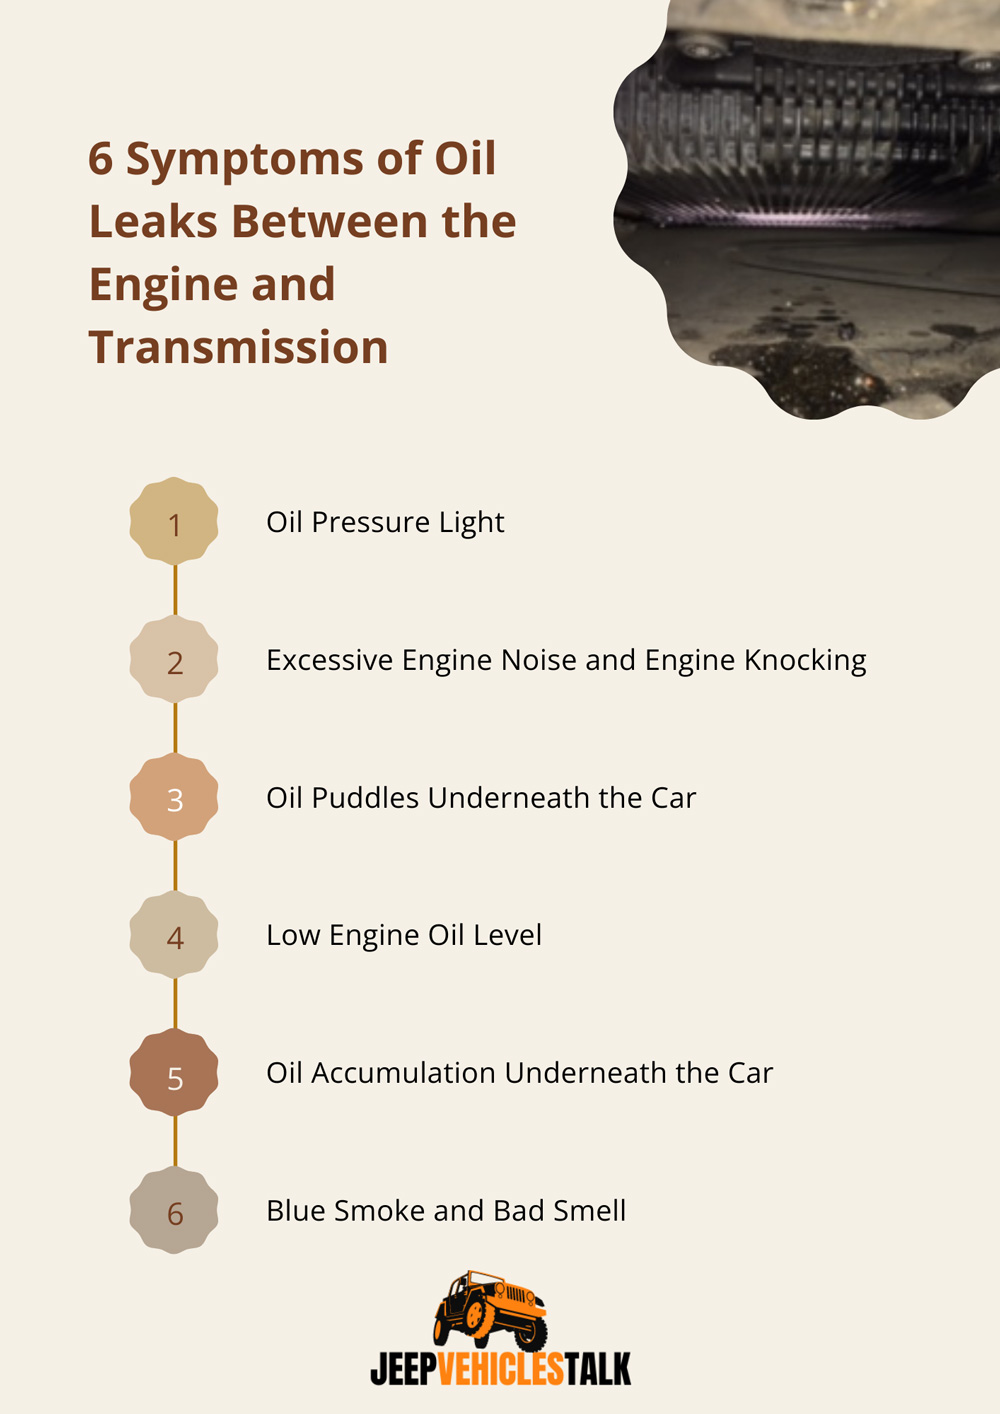 Symptoms of Oil Leaks Between the Engine and Transmission